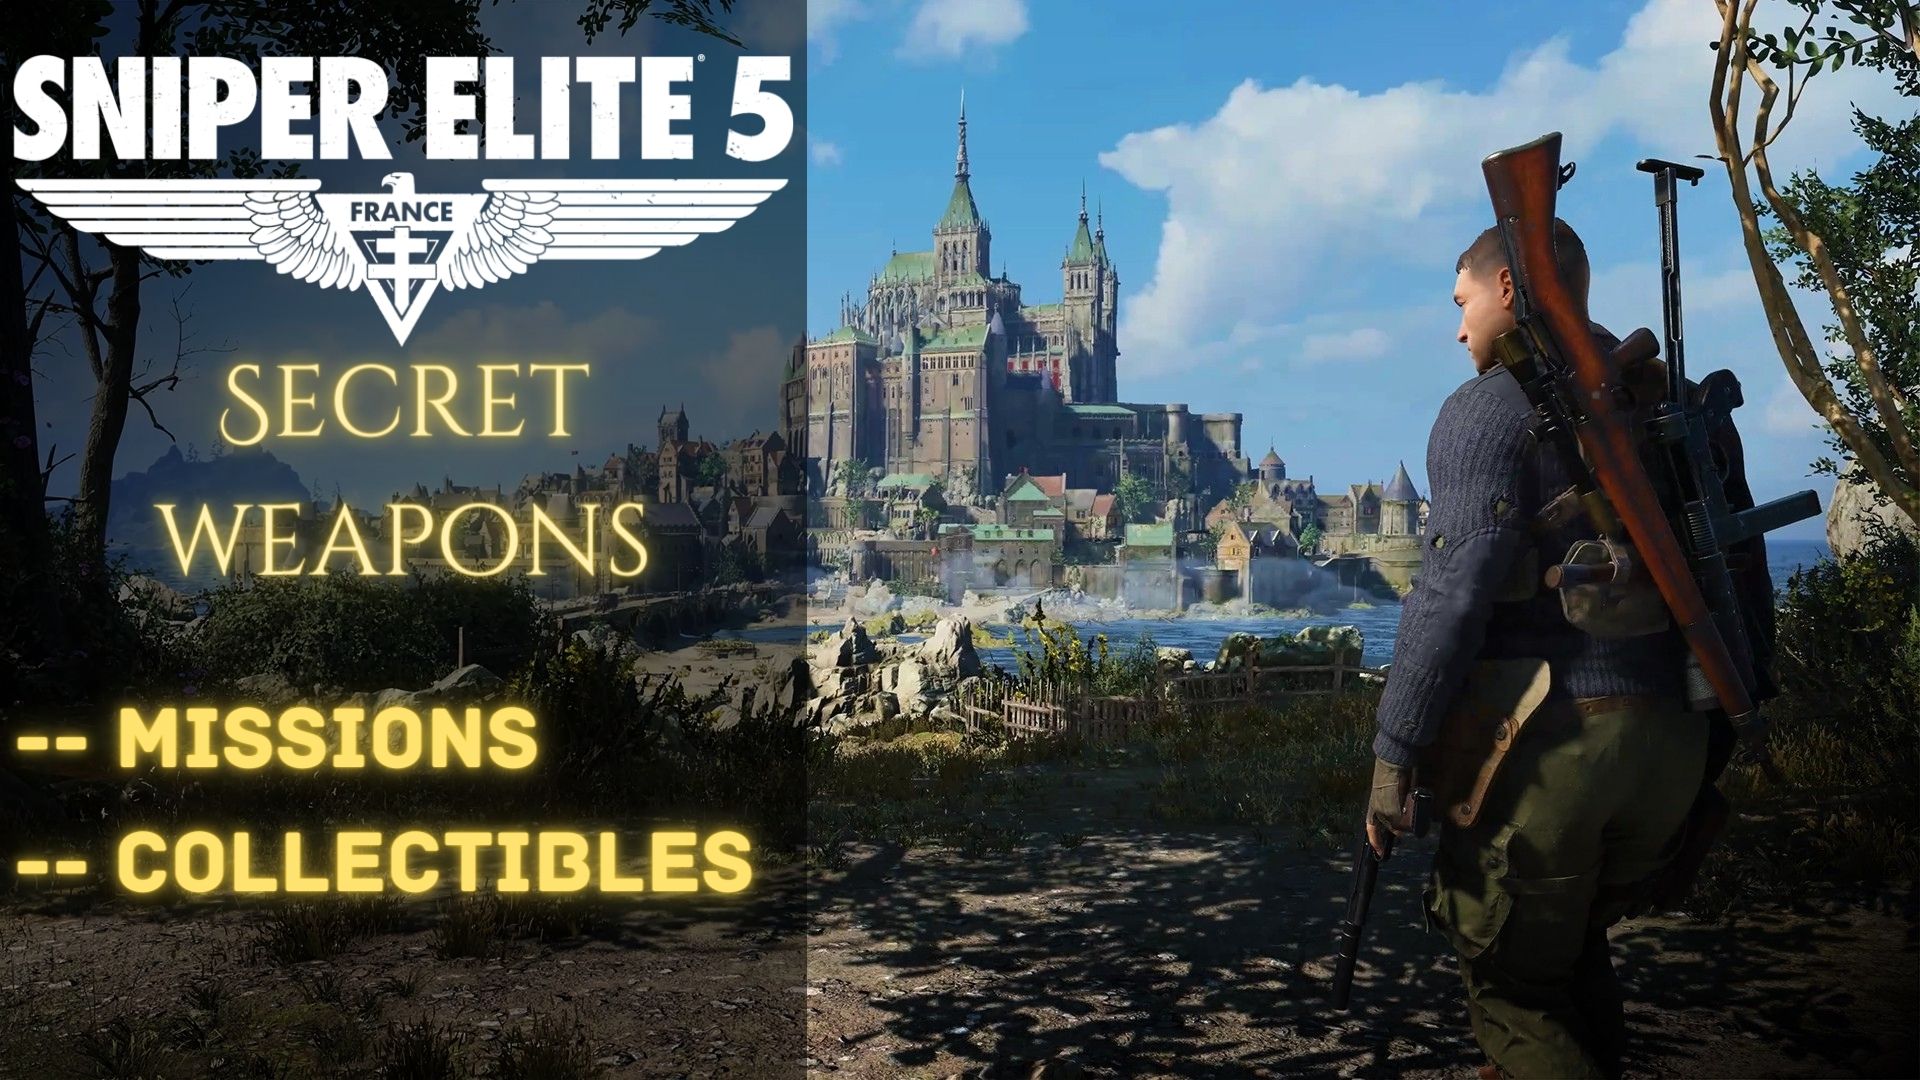 sniper-elite-5-secret-weapons-all-collectibles-missions-exputer